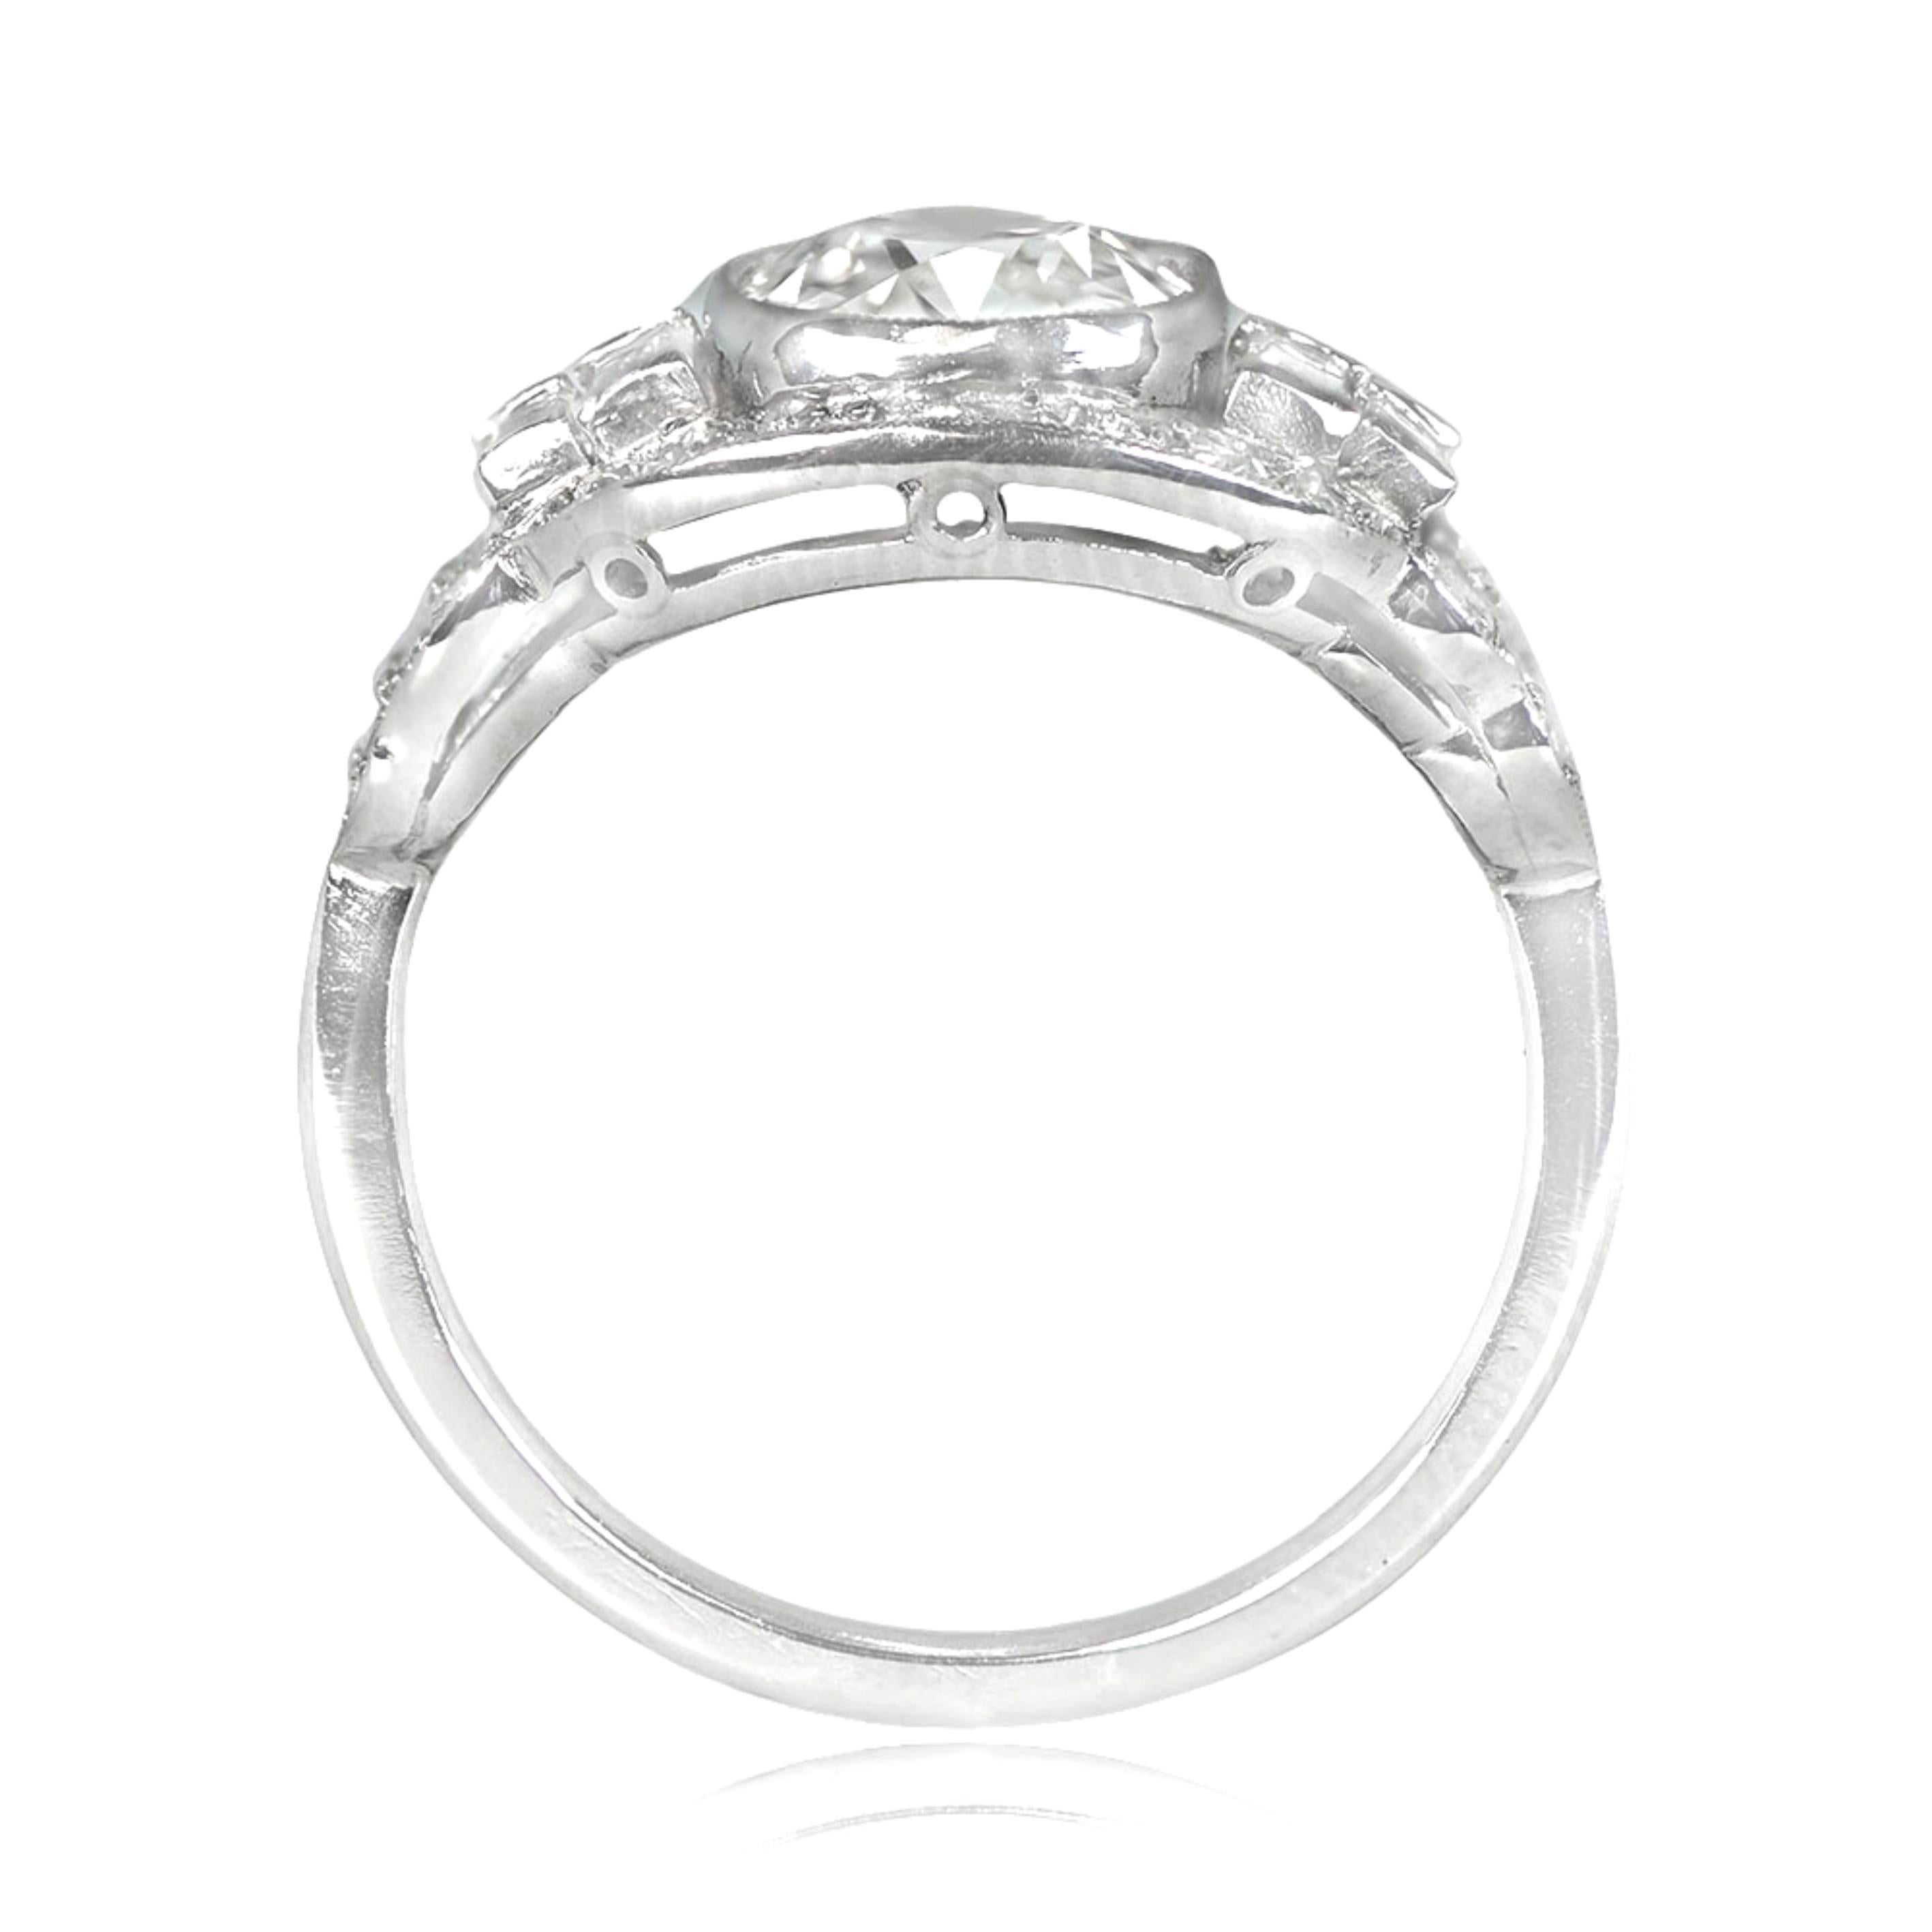 The Oakland Ring is a hand-crafted platinum piece featuring an antique cushion cut diamond weighing 1.37 carats with J color and SI1 clarity. It also boasts a graduating design of channel-set baguette and old European cut diamonds extending along